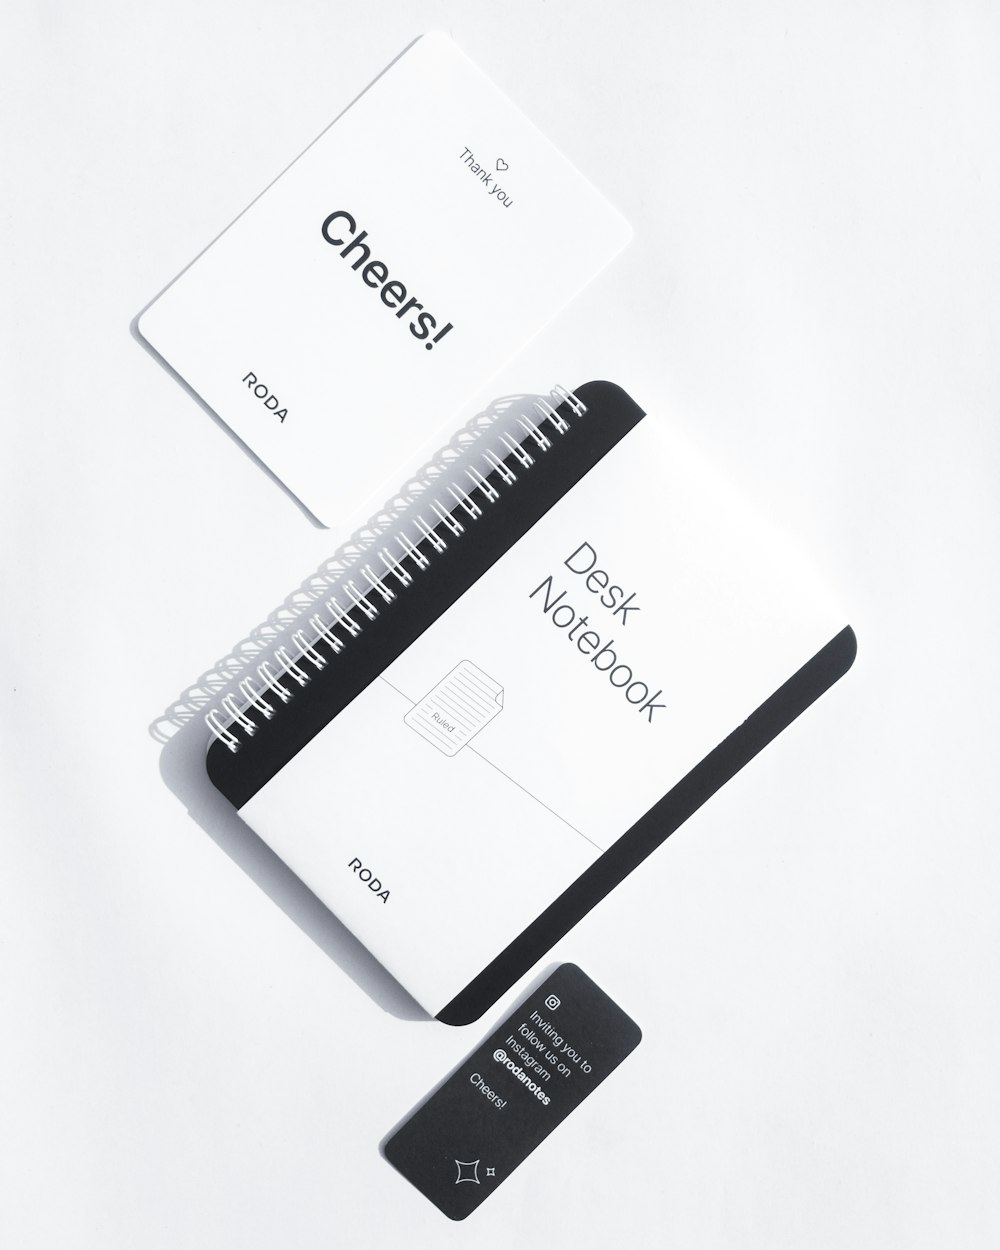 a notebook and a credit card on a white surface